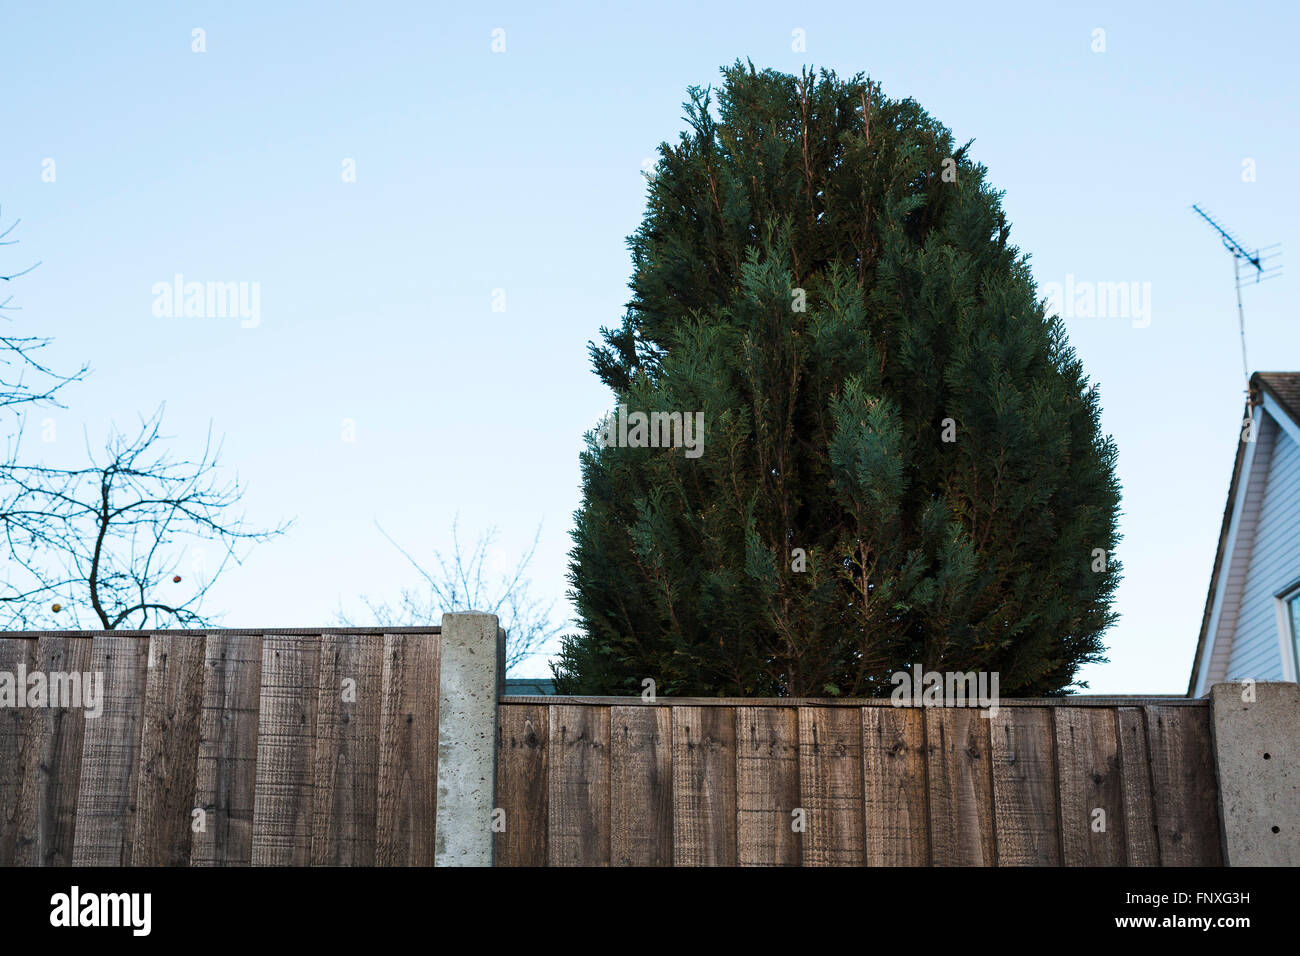 A large hedge or bush behind a fence panel on a UK housing estate. Stock Photo